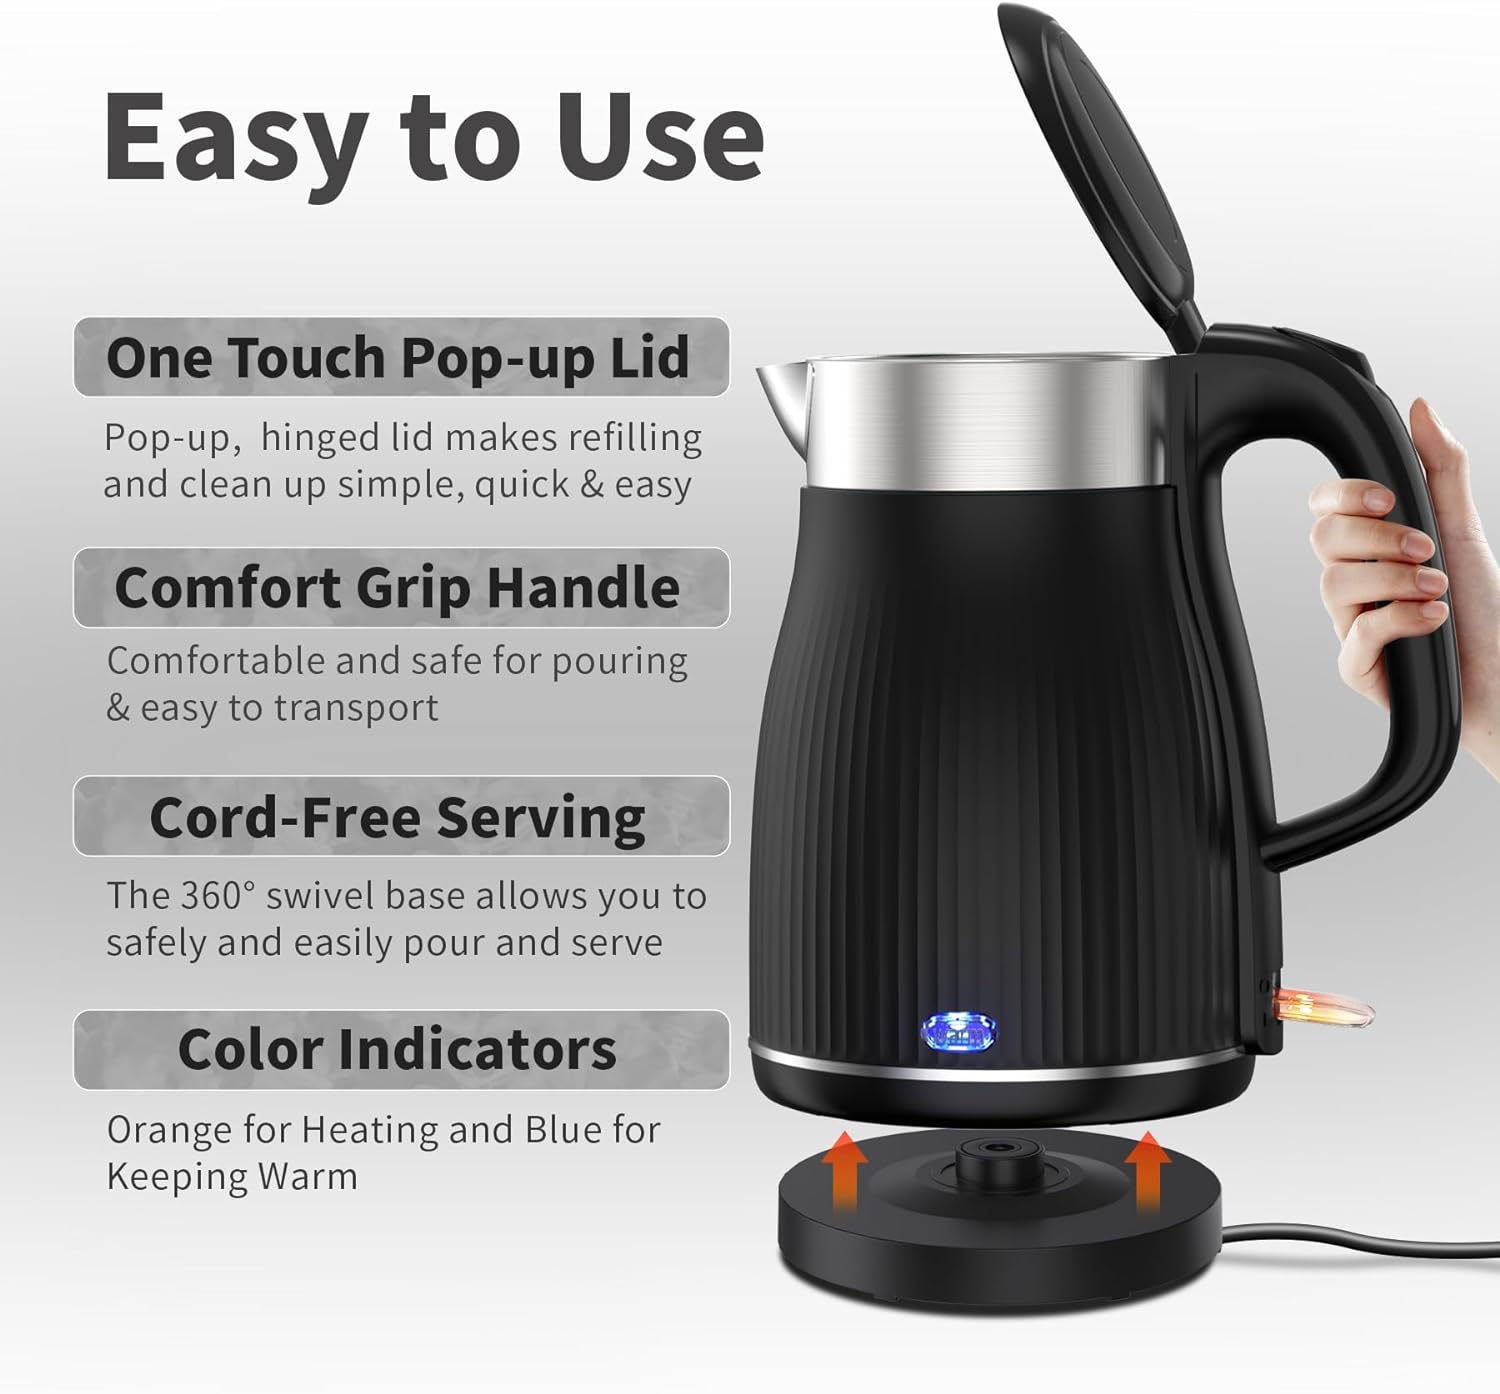 OMISOON Electric Kettle Stainless Steel 1.8L, Kettles Electric with Keep Warm Function, 1500W - 1800W Rapid Boil, Auto Shut - Off and Boil - Dry Protection, Black - Amazing Gadgets Outlet